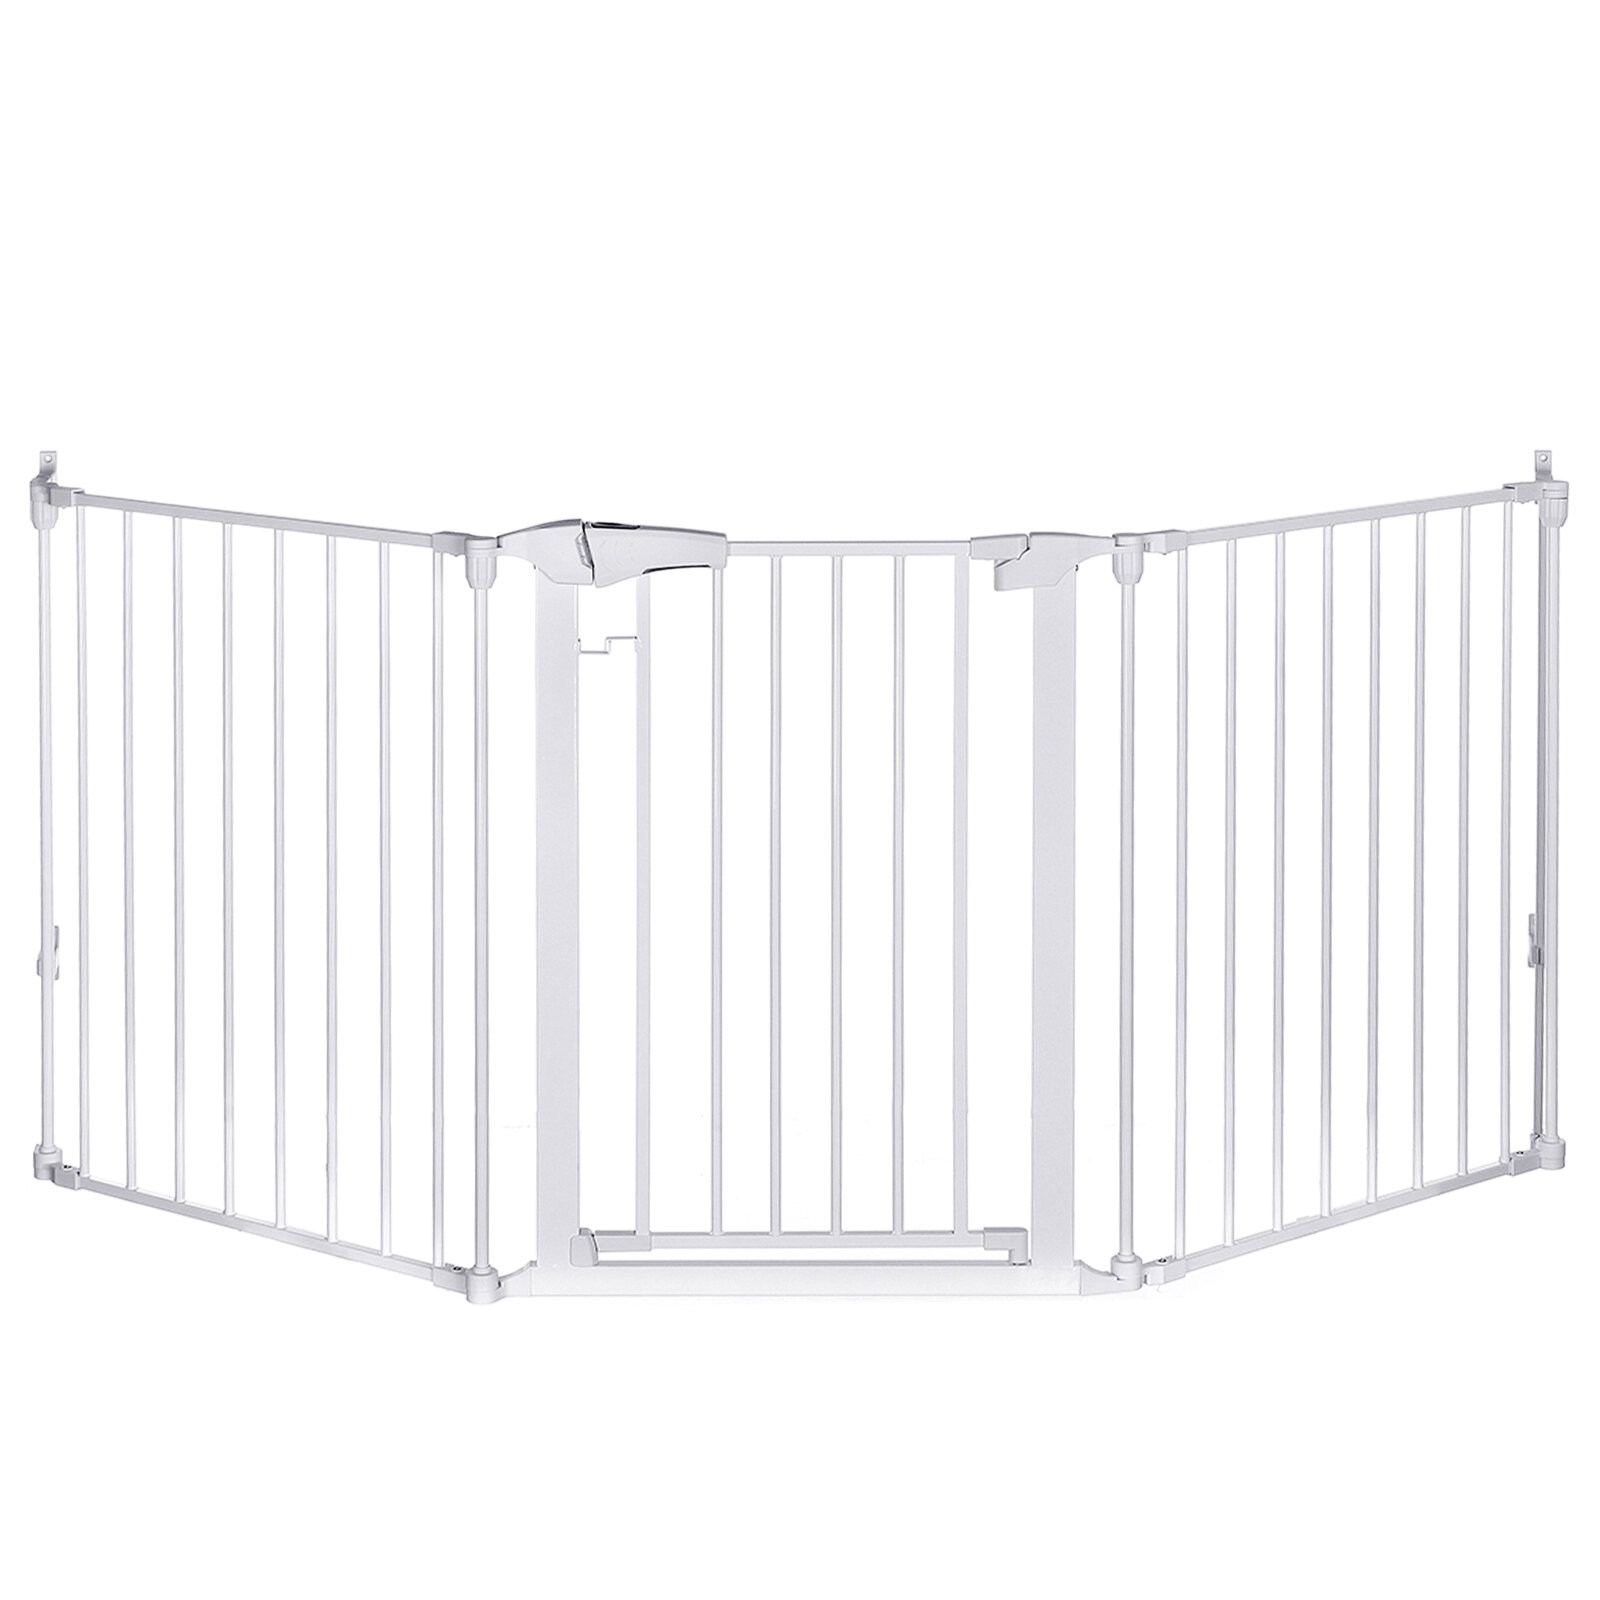 

3-in-1 203CM Extra Wide Baby Safety Gate Double Lock Sturdy Stair Gate Door Gate Stair Barrier Gate